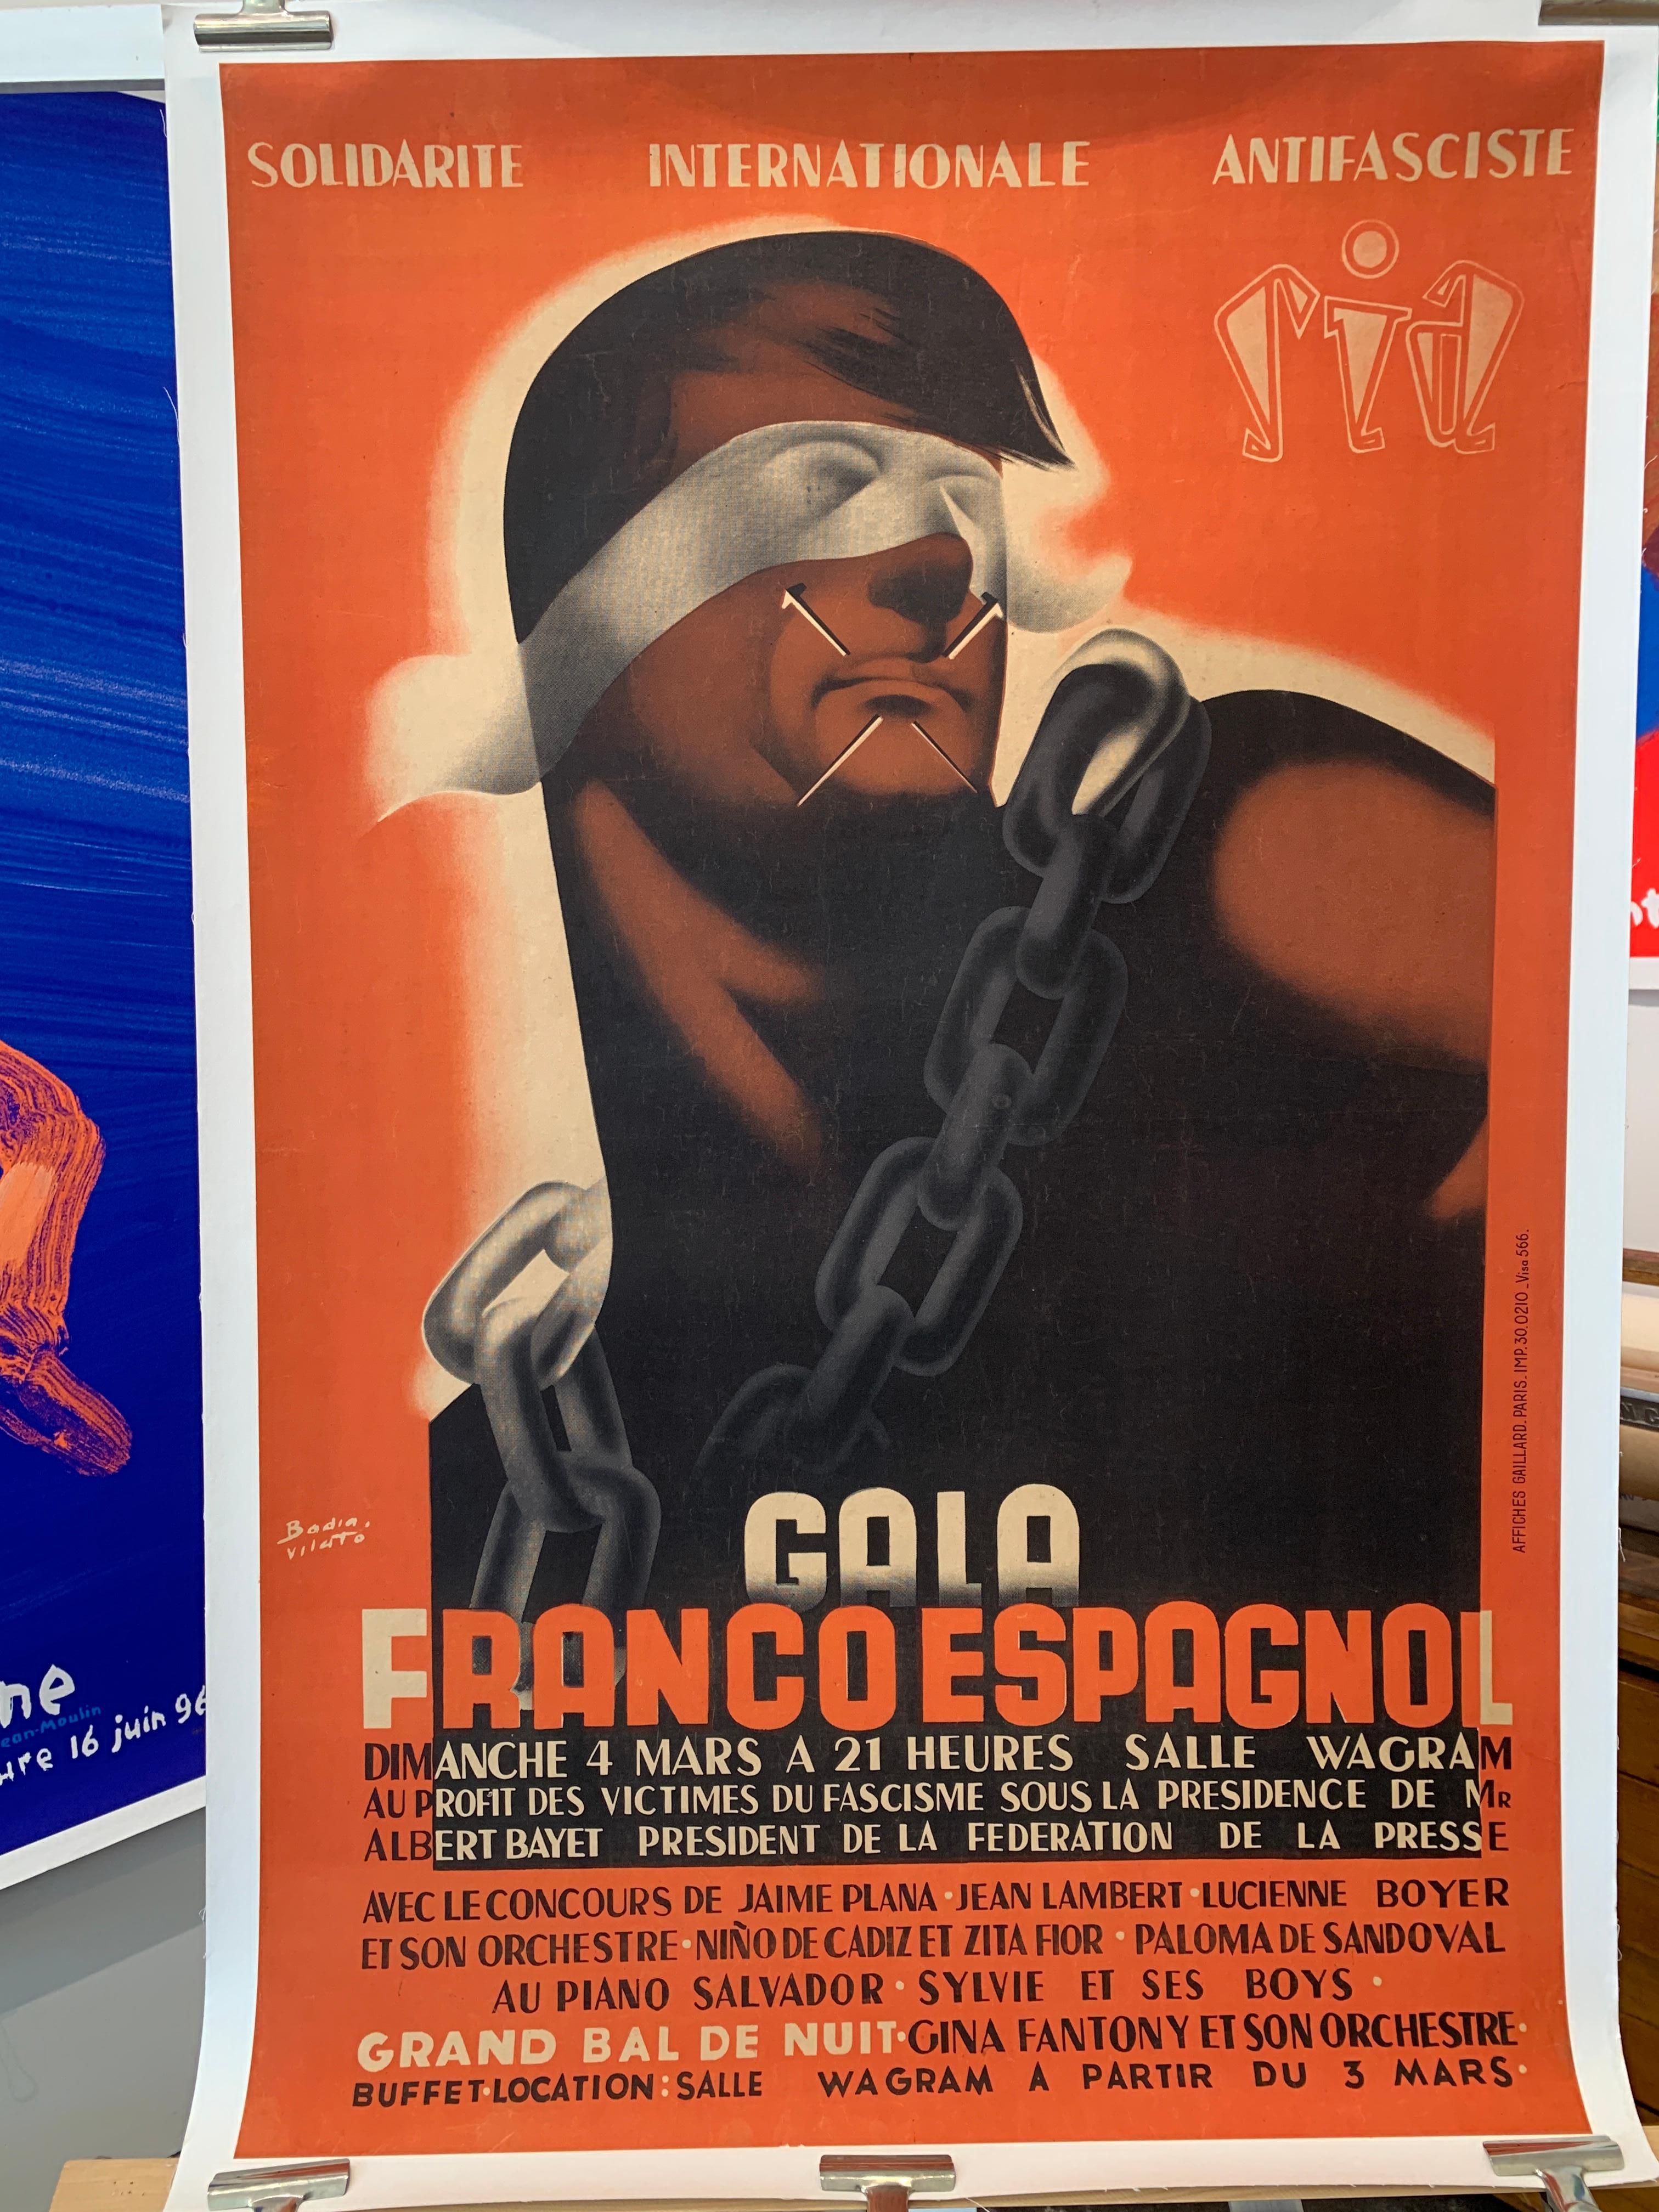 Original Vintage Political Poster, 'GALA FRANCO ESPAGNOL'

This is an original vintage poster depicting Francisco Franco, who lead the Nationalist forces in overthrowing the Second Spanish Republic during the Spanish Civil War and thereafter ruled